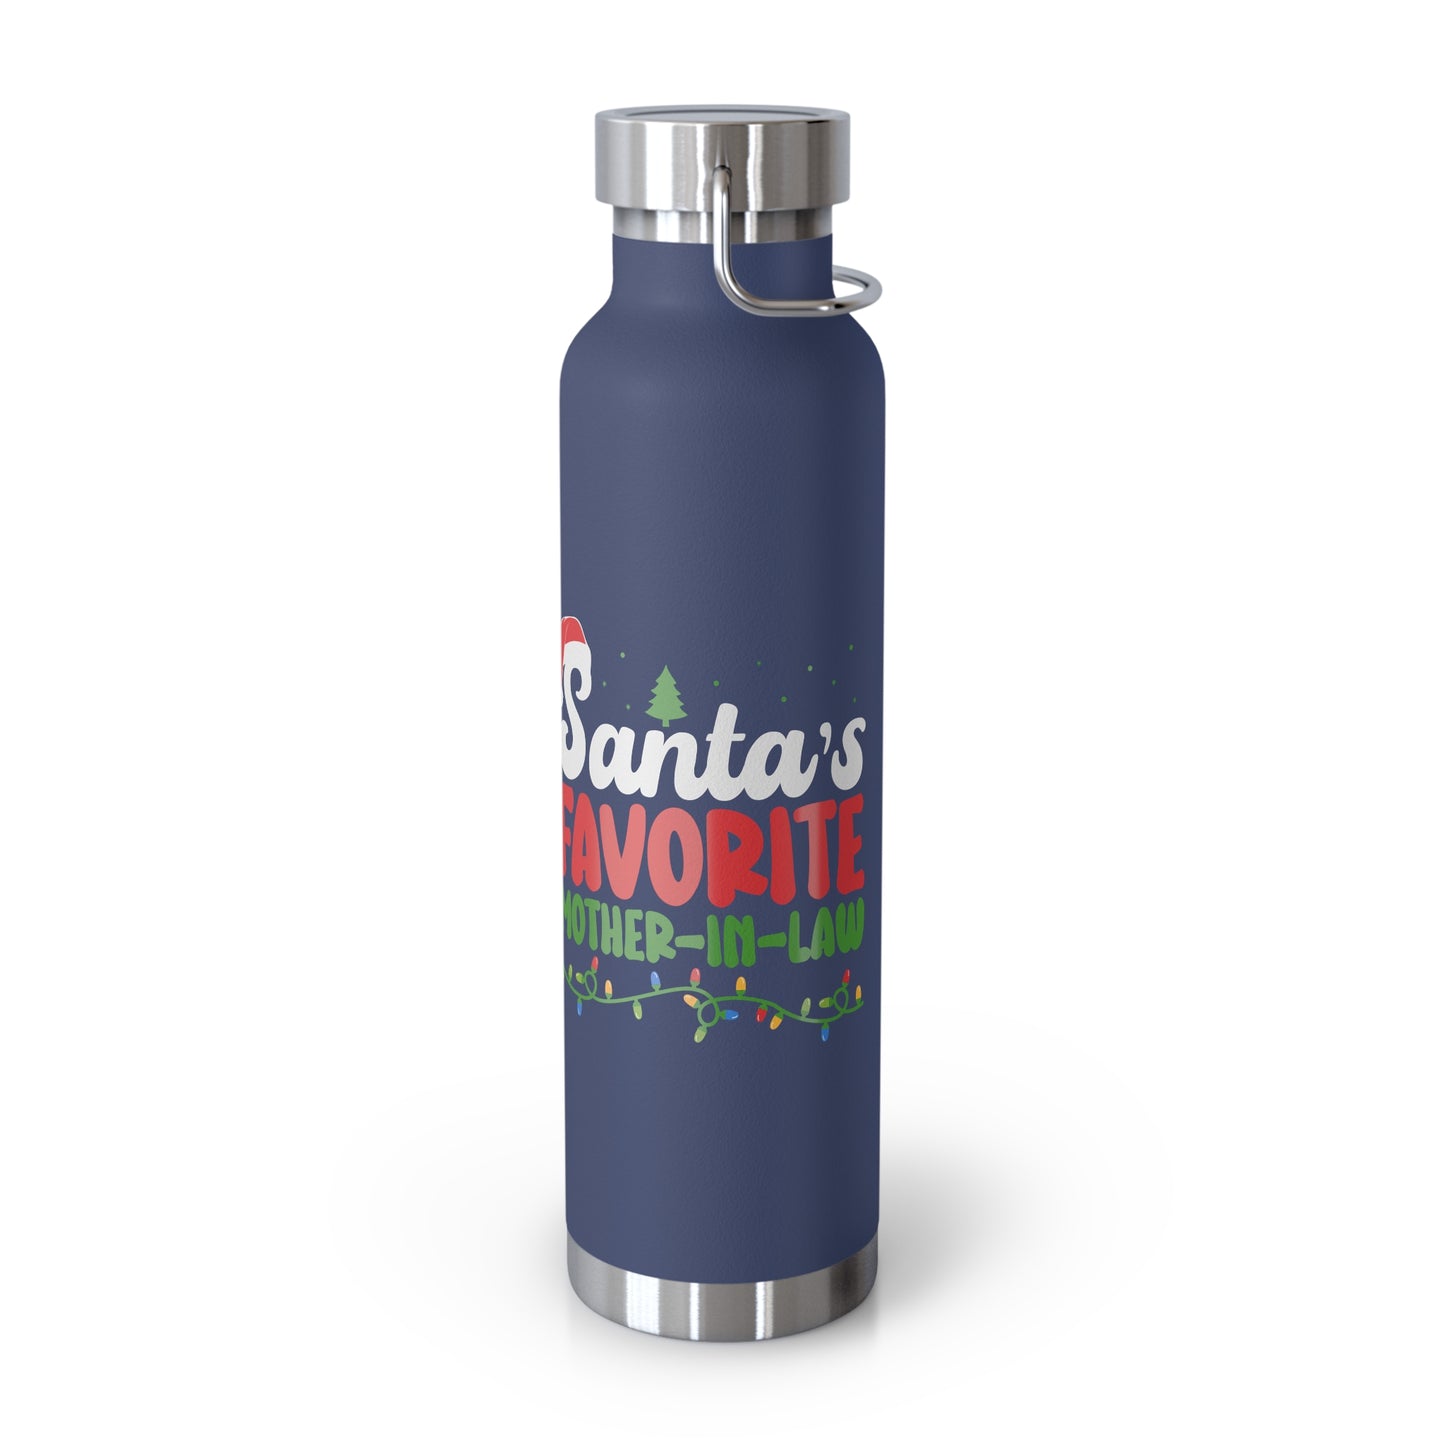 Santa's Favorite Mother-In-Law Copper Vacuum Insulated Bottle, 22oz